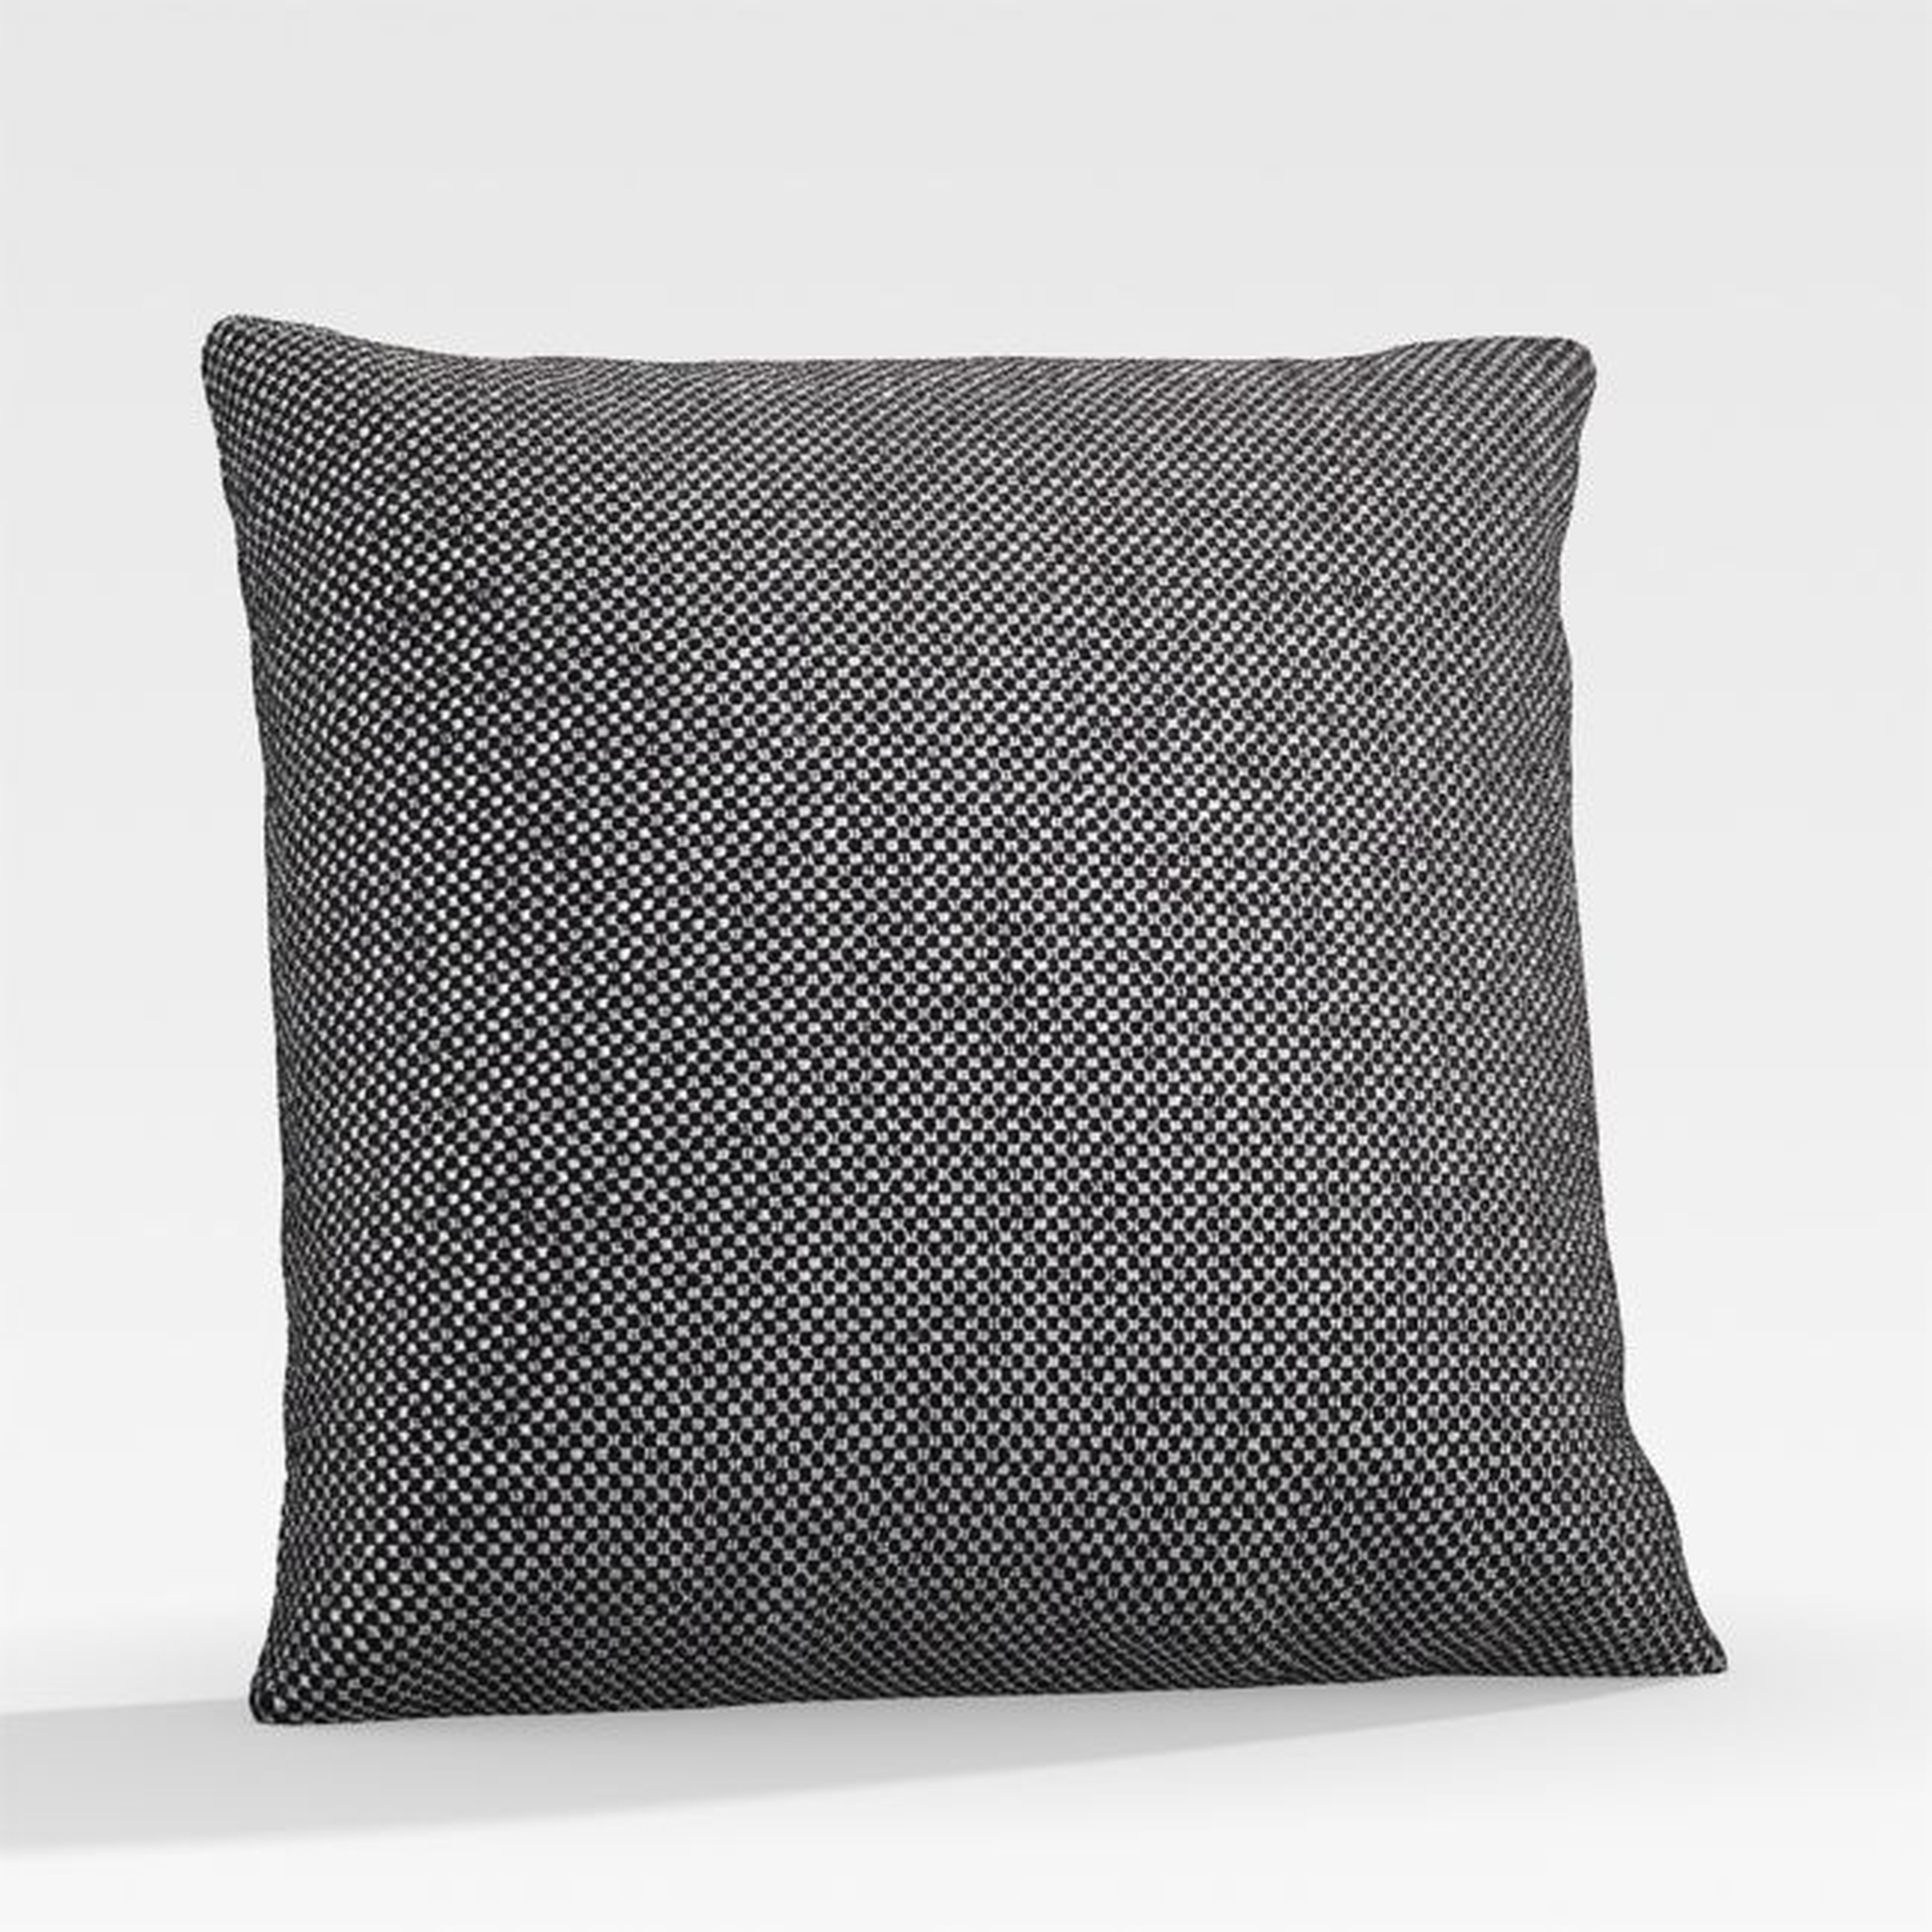 Trixie 20" Black Outdoor Pillow - Crate and Barrel